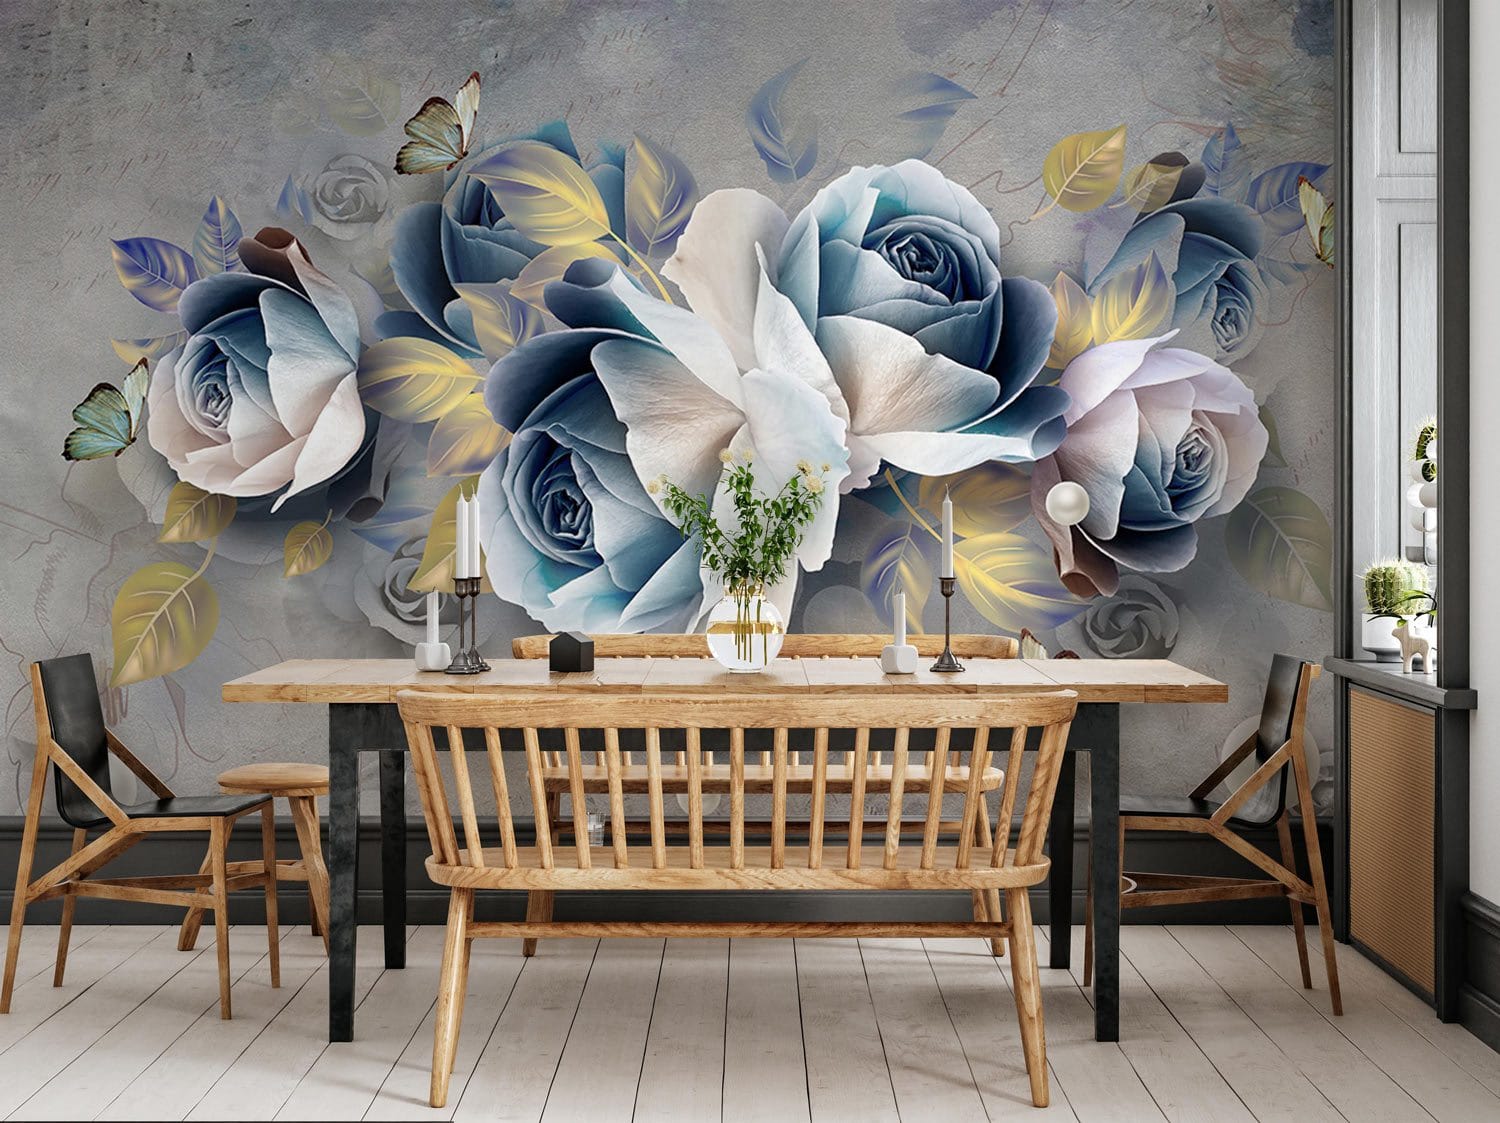 Dining Room Wall Painting Mural: Blue Enchantress with Pearls